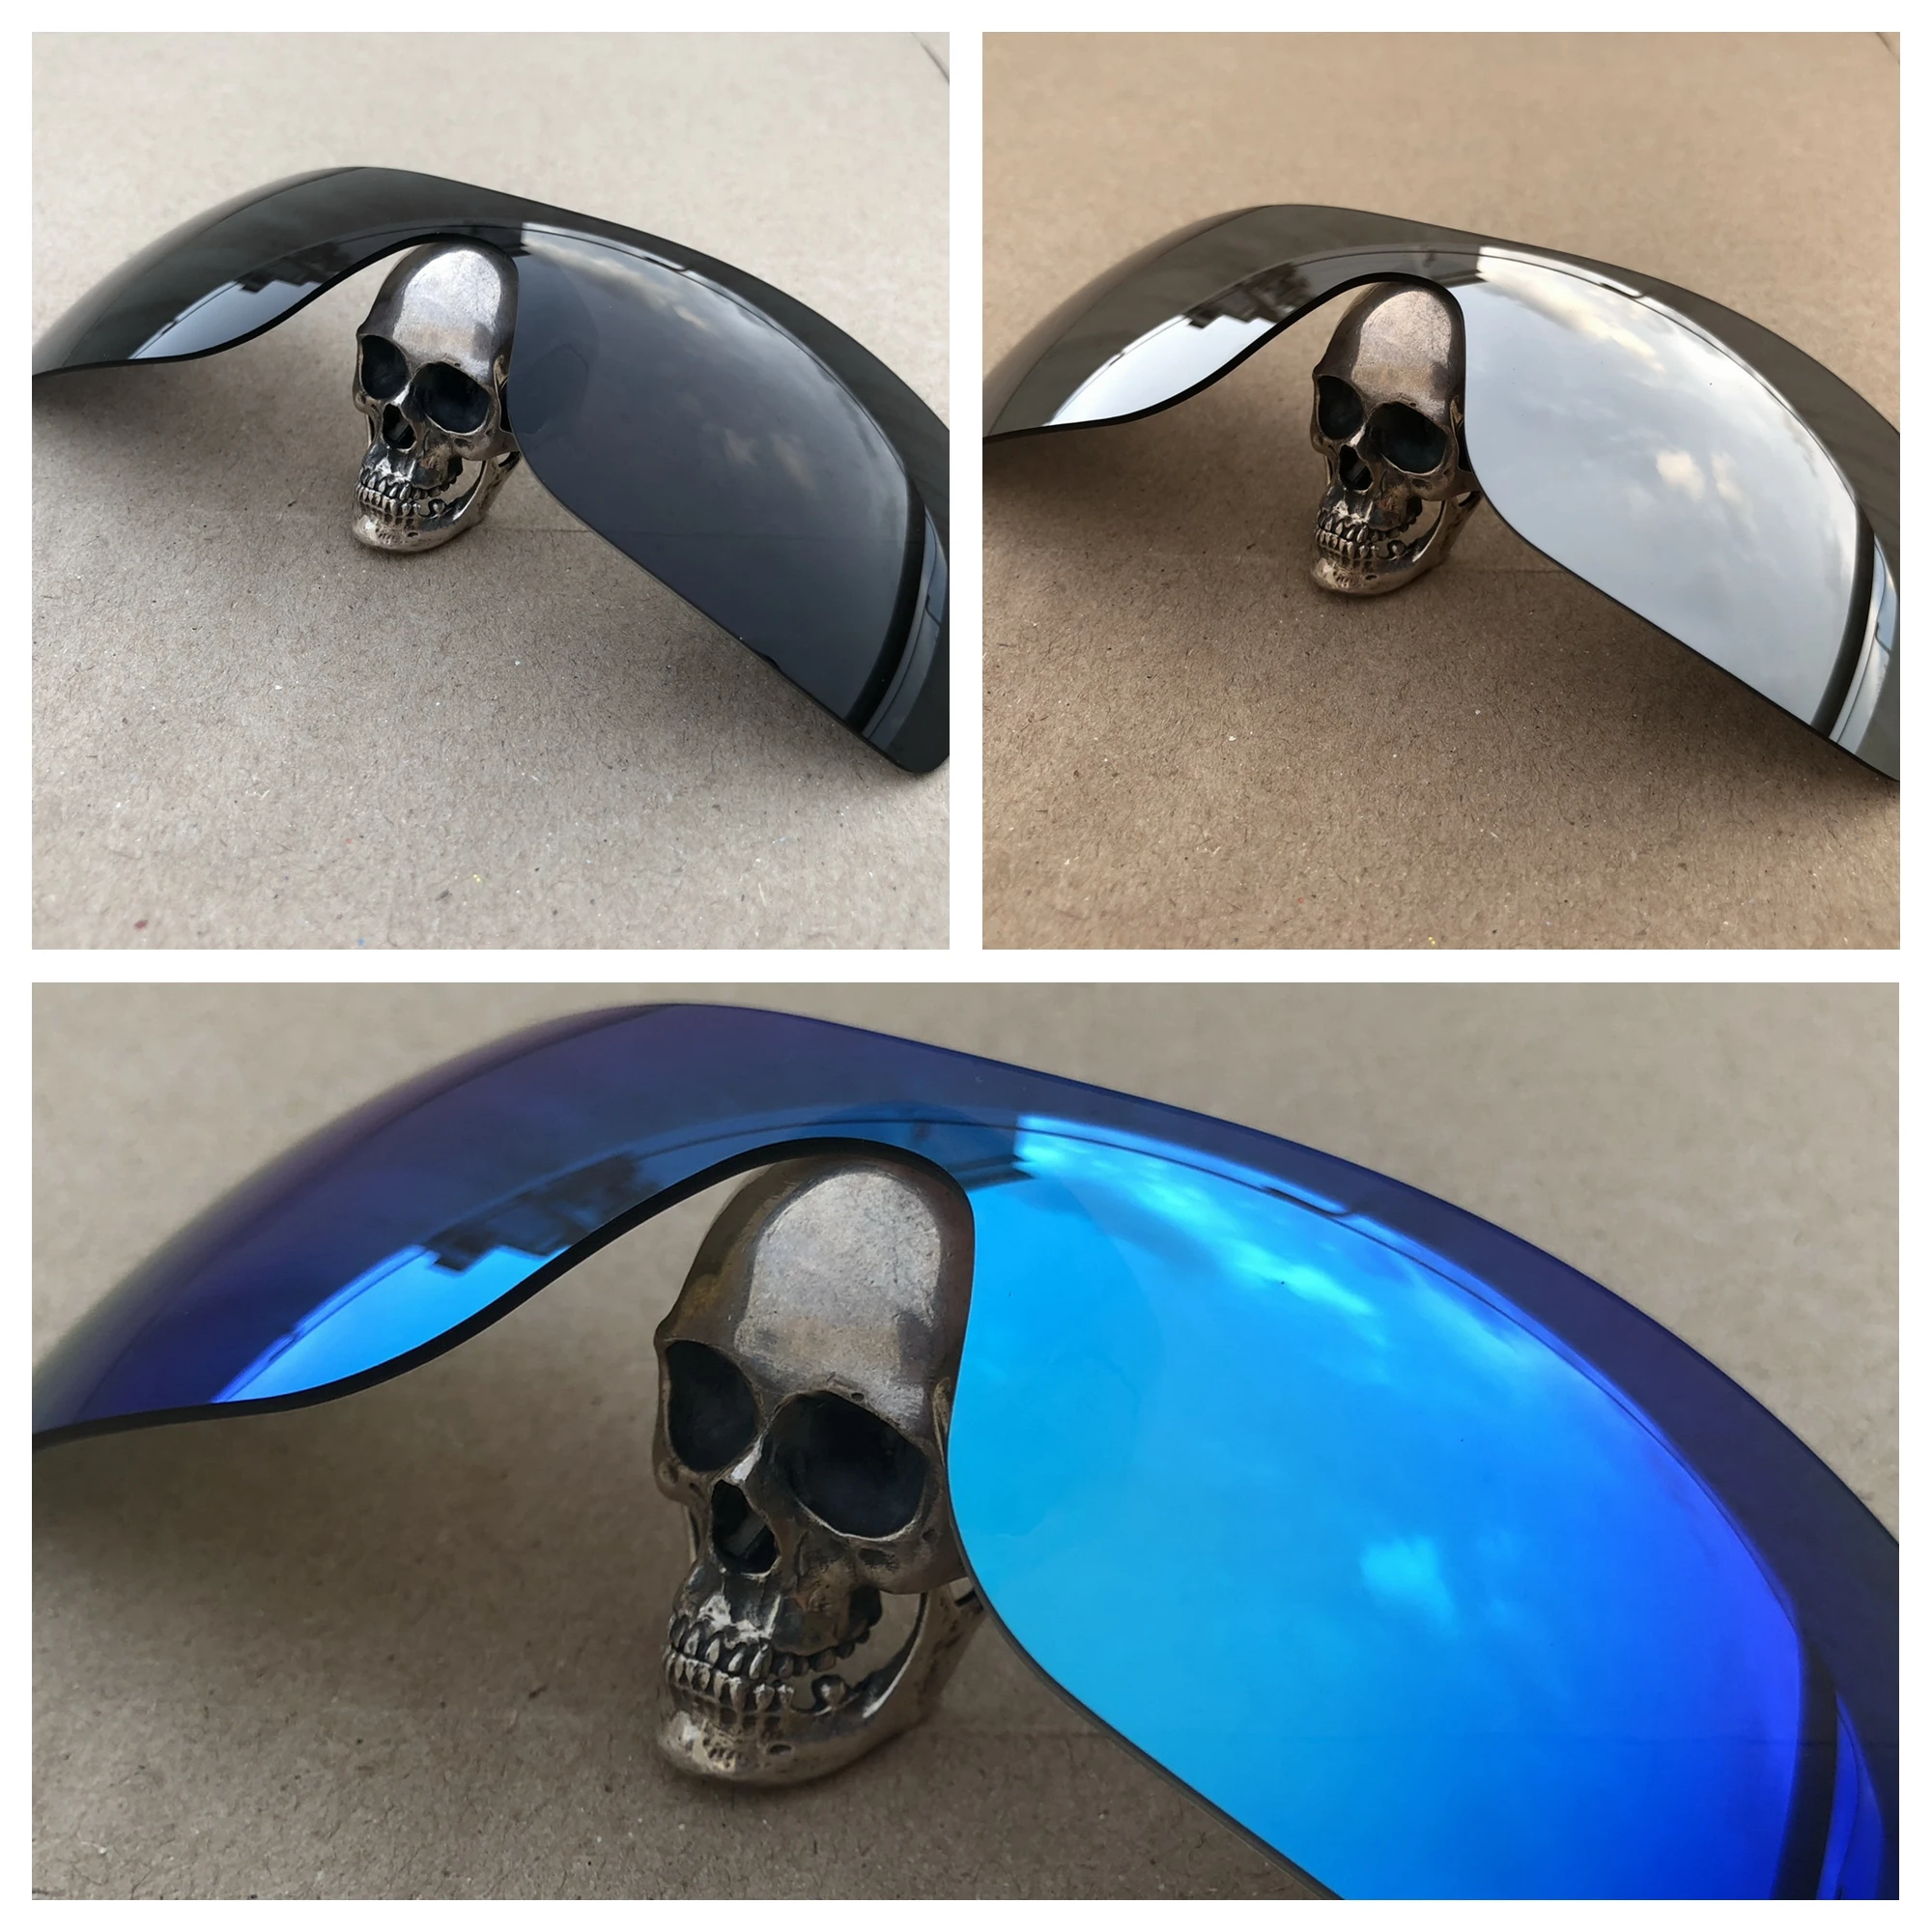 

Firtox True Polarized Enhanced Replacement Lenses for-Oakley Batwolf OO9101 Sunglass (Lens Only) - Black+Sliver+Blue